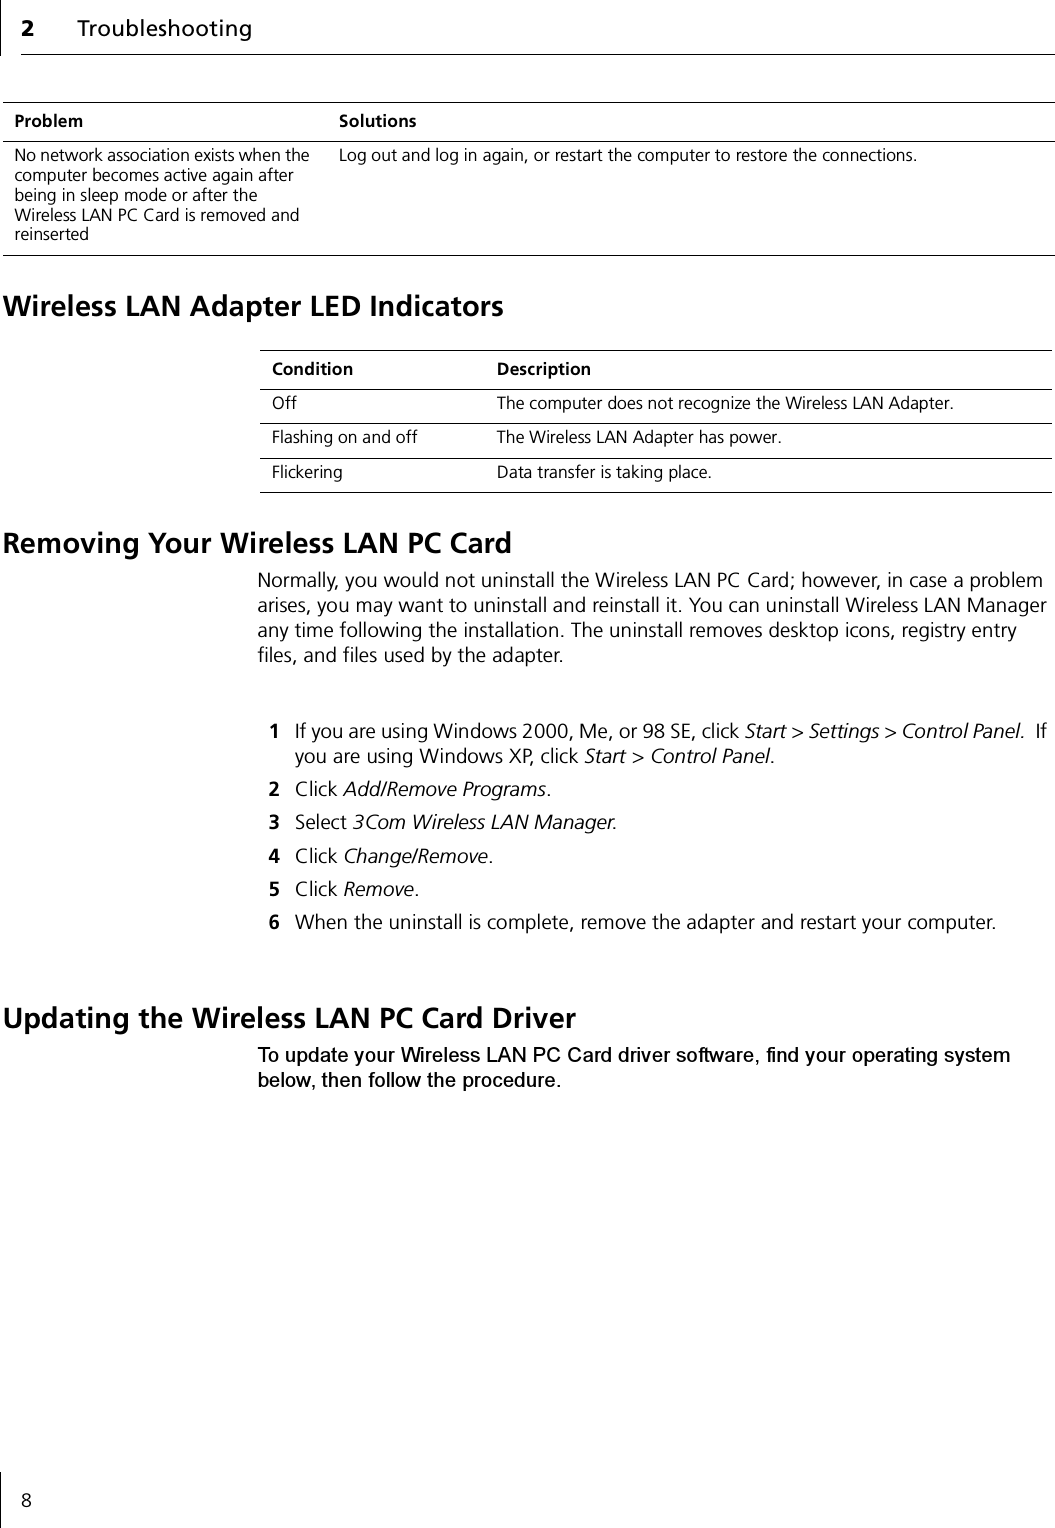 2Troubleshooting8Wireless LAN Adapter LED IndicatorsRemoving Your Wireless LAN PC CardNormally, you would not uninstall the Wireless LAN PC Card; however, in case a problem arises, you may want to uninstall and reinstall it. You can uninstall Wireless LAN Manager any time following the installation. The uninstall removes desktop icons, registry entry files, and files used by the adapter.1If you are using Windows 2000, Me, or 98 SE, click Start &gt; Settings &gt; Control Panel.  If you are using Windows XP, click Start &gt; Control Panel.2Click Add/Remove Programs.3Select 3Com Wireless LAN Manager.4Click Change/Remove.5Click Remove.6When the uninstall is complete, remove the adapter and restart your computer.Updating the Wireless LAN PC Card DriverTo update your Wireless LAN PC Card driver software, find your operating system below, then follow the procedure.No network association exists when the computer becomes active again after being in sleep mode or after the Wireless LAN PC Card is removed and reinsertedLog out and log in again, or restart the computer to restore the connections.Problem SolutionsCondition DescriptionOff The computer does not recognize the Wireless LAN Adapter.Flashing on and off The Wireless LAN Adapter has power. Flickering Data transfer is taking place.